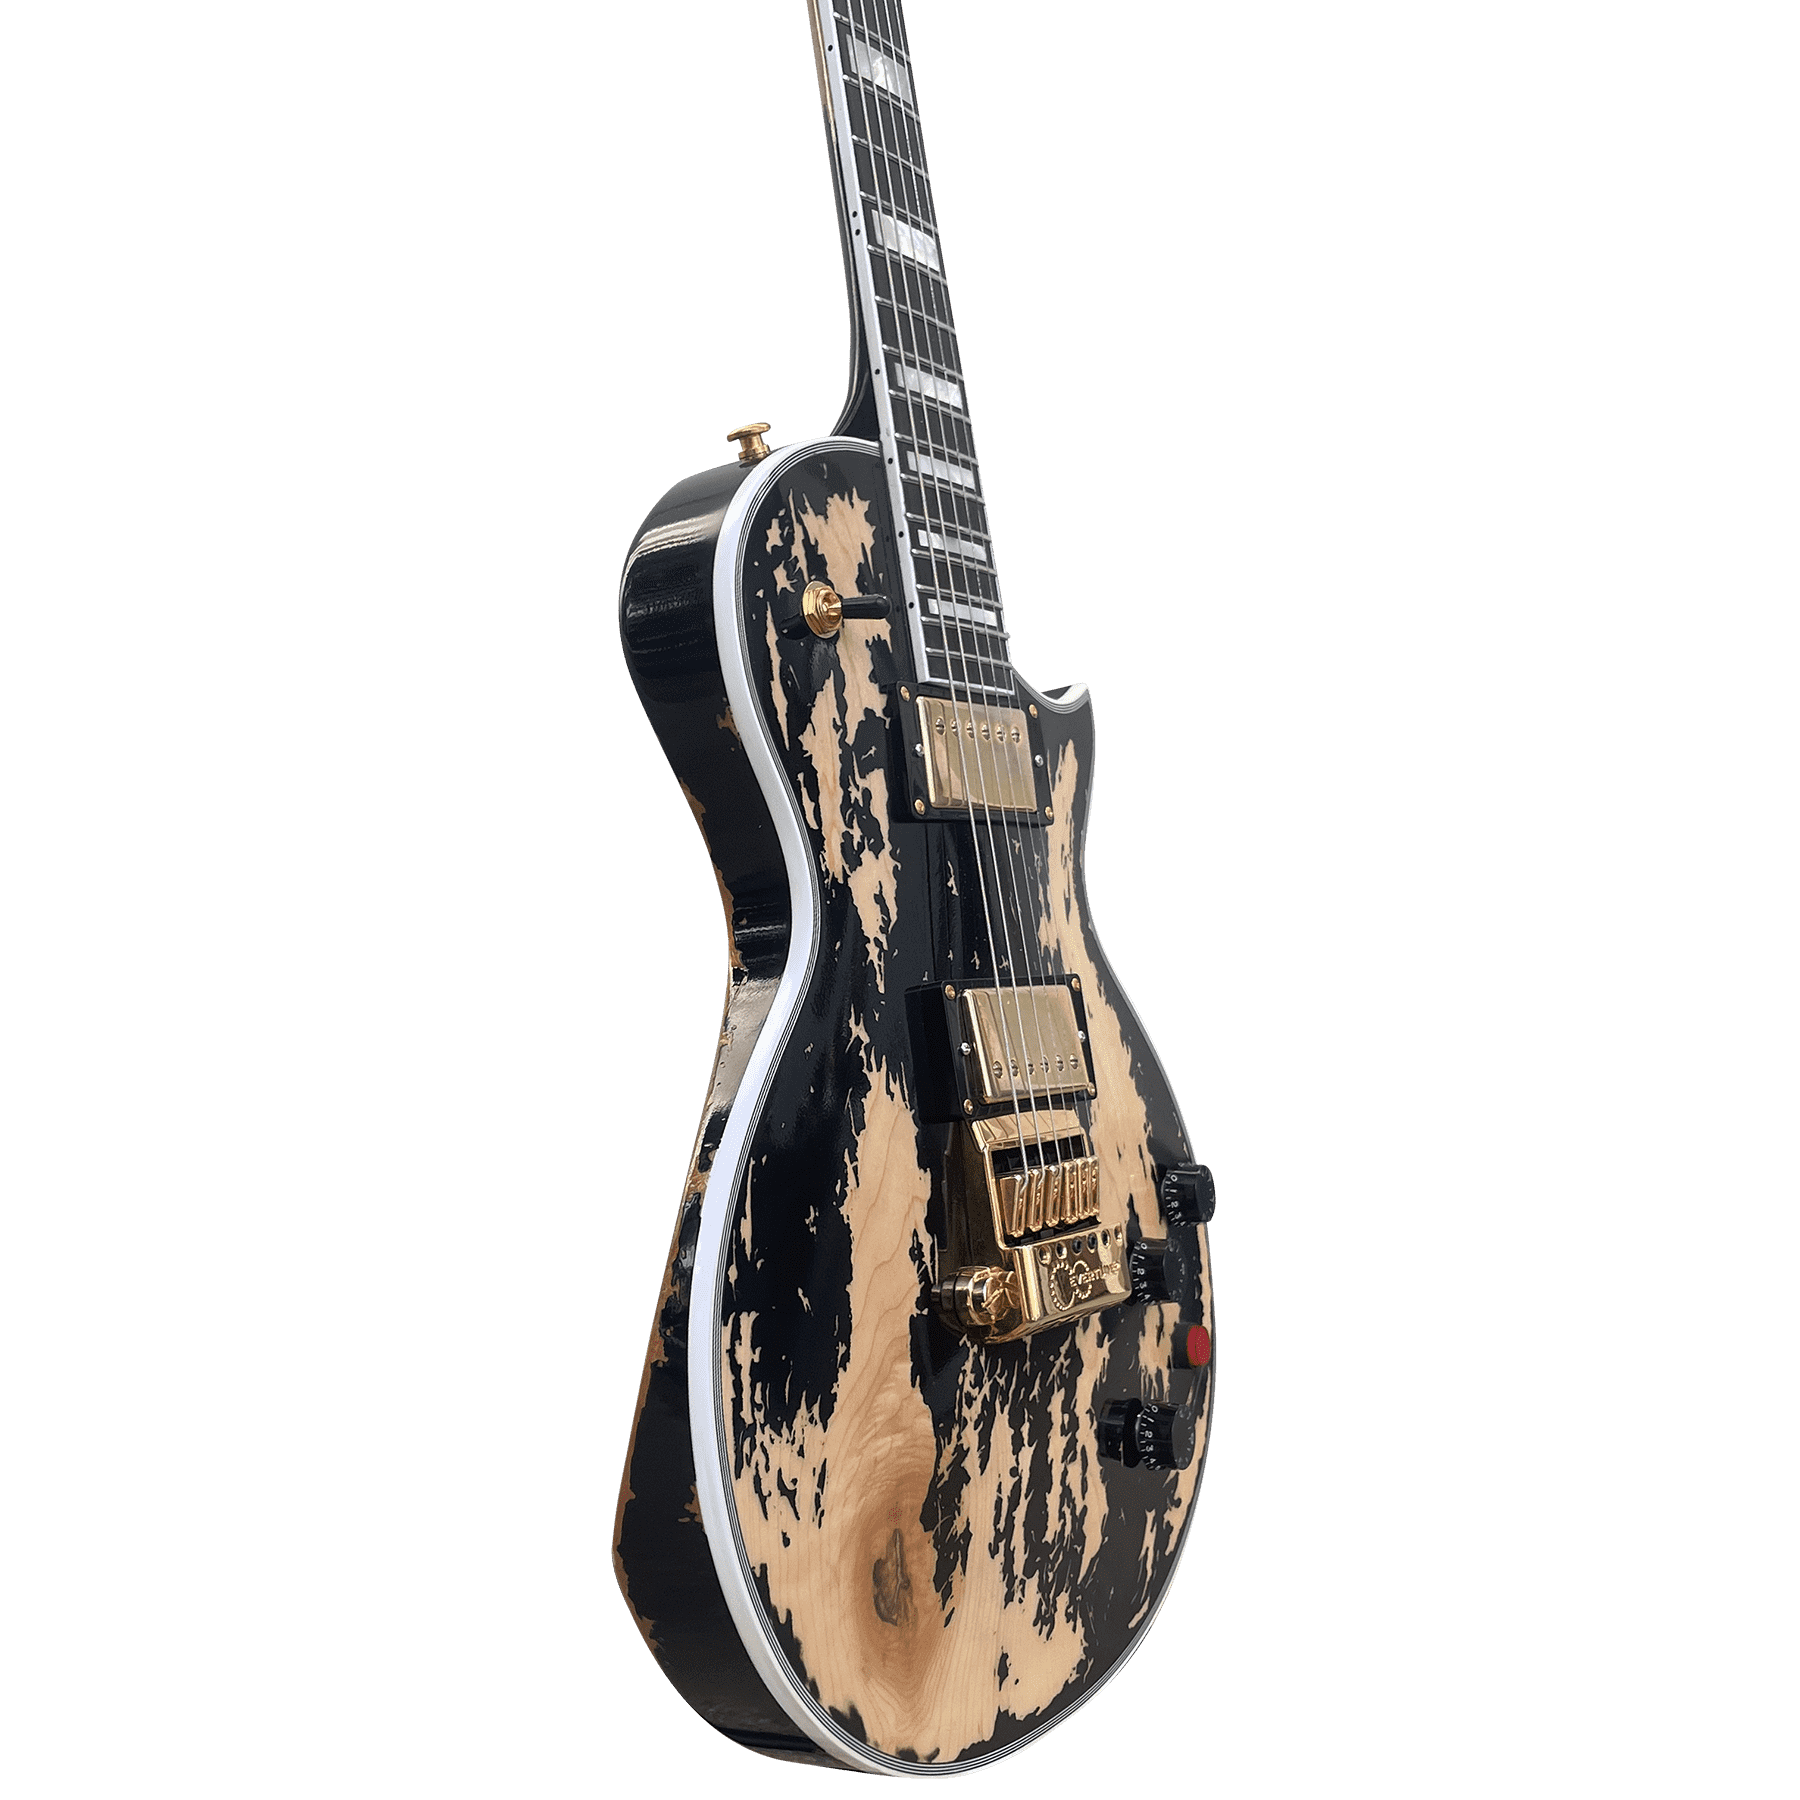 Old Blackie Relic Evertune - 10S Guitars